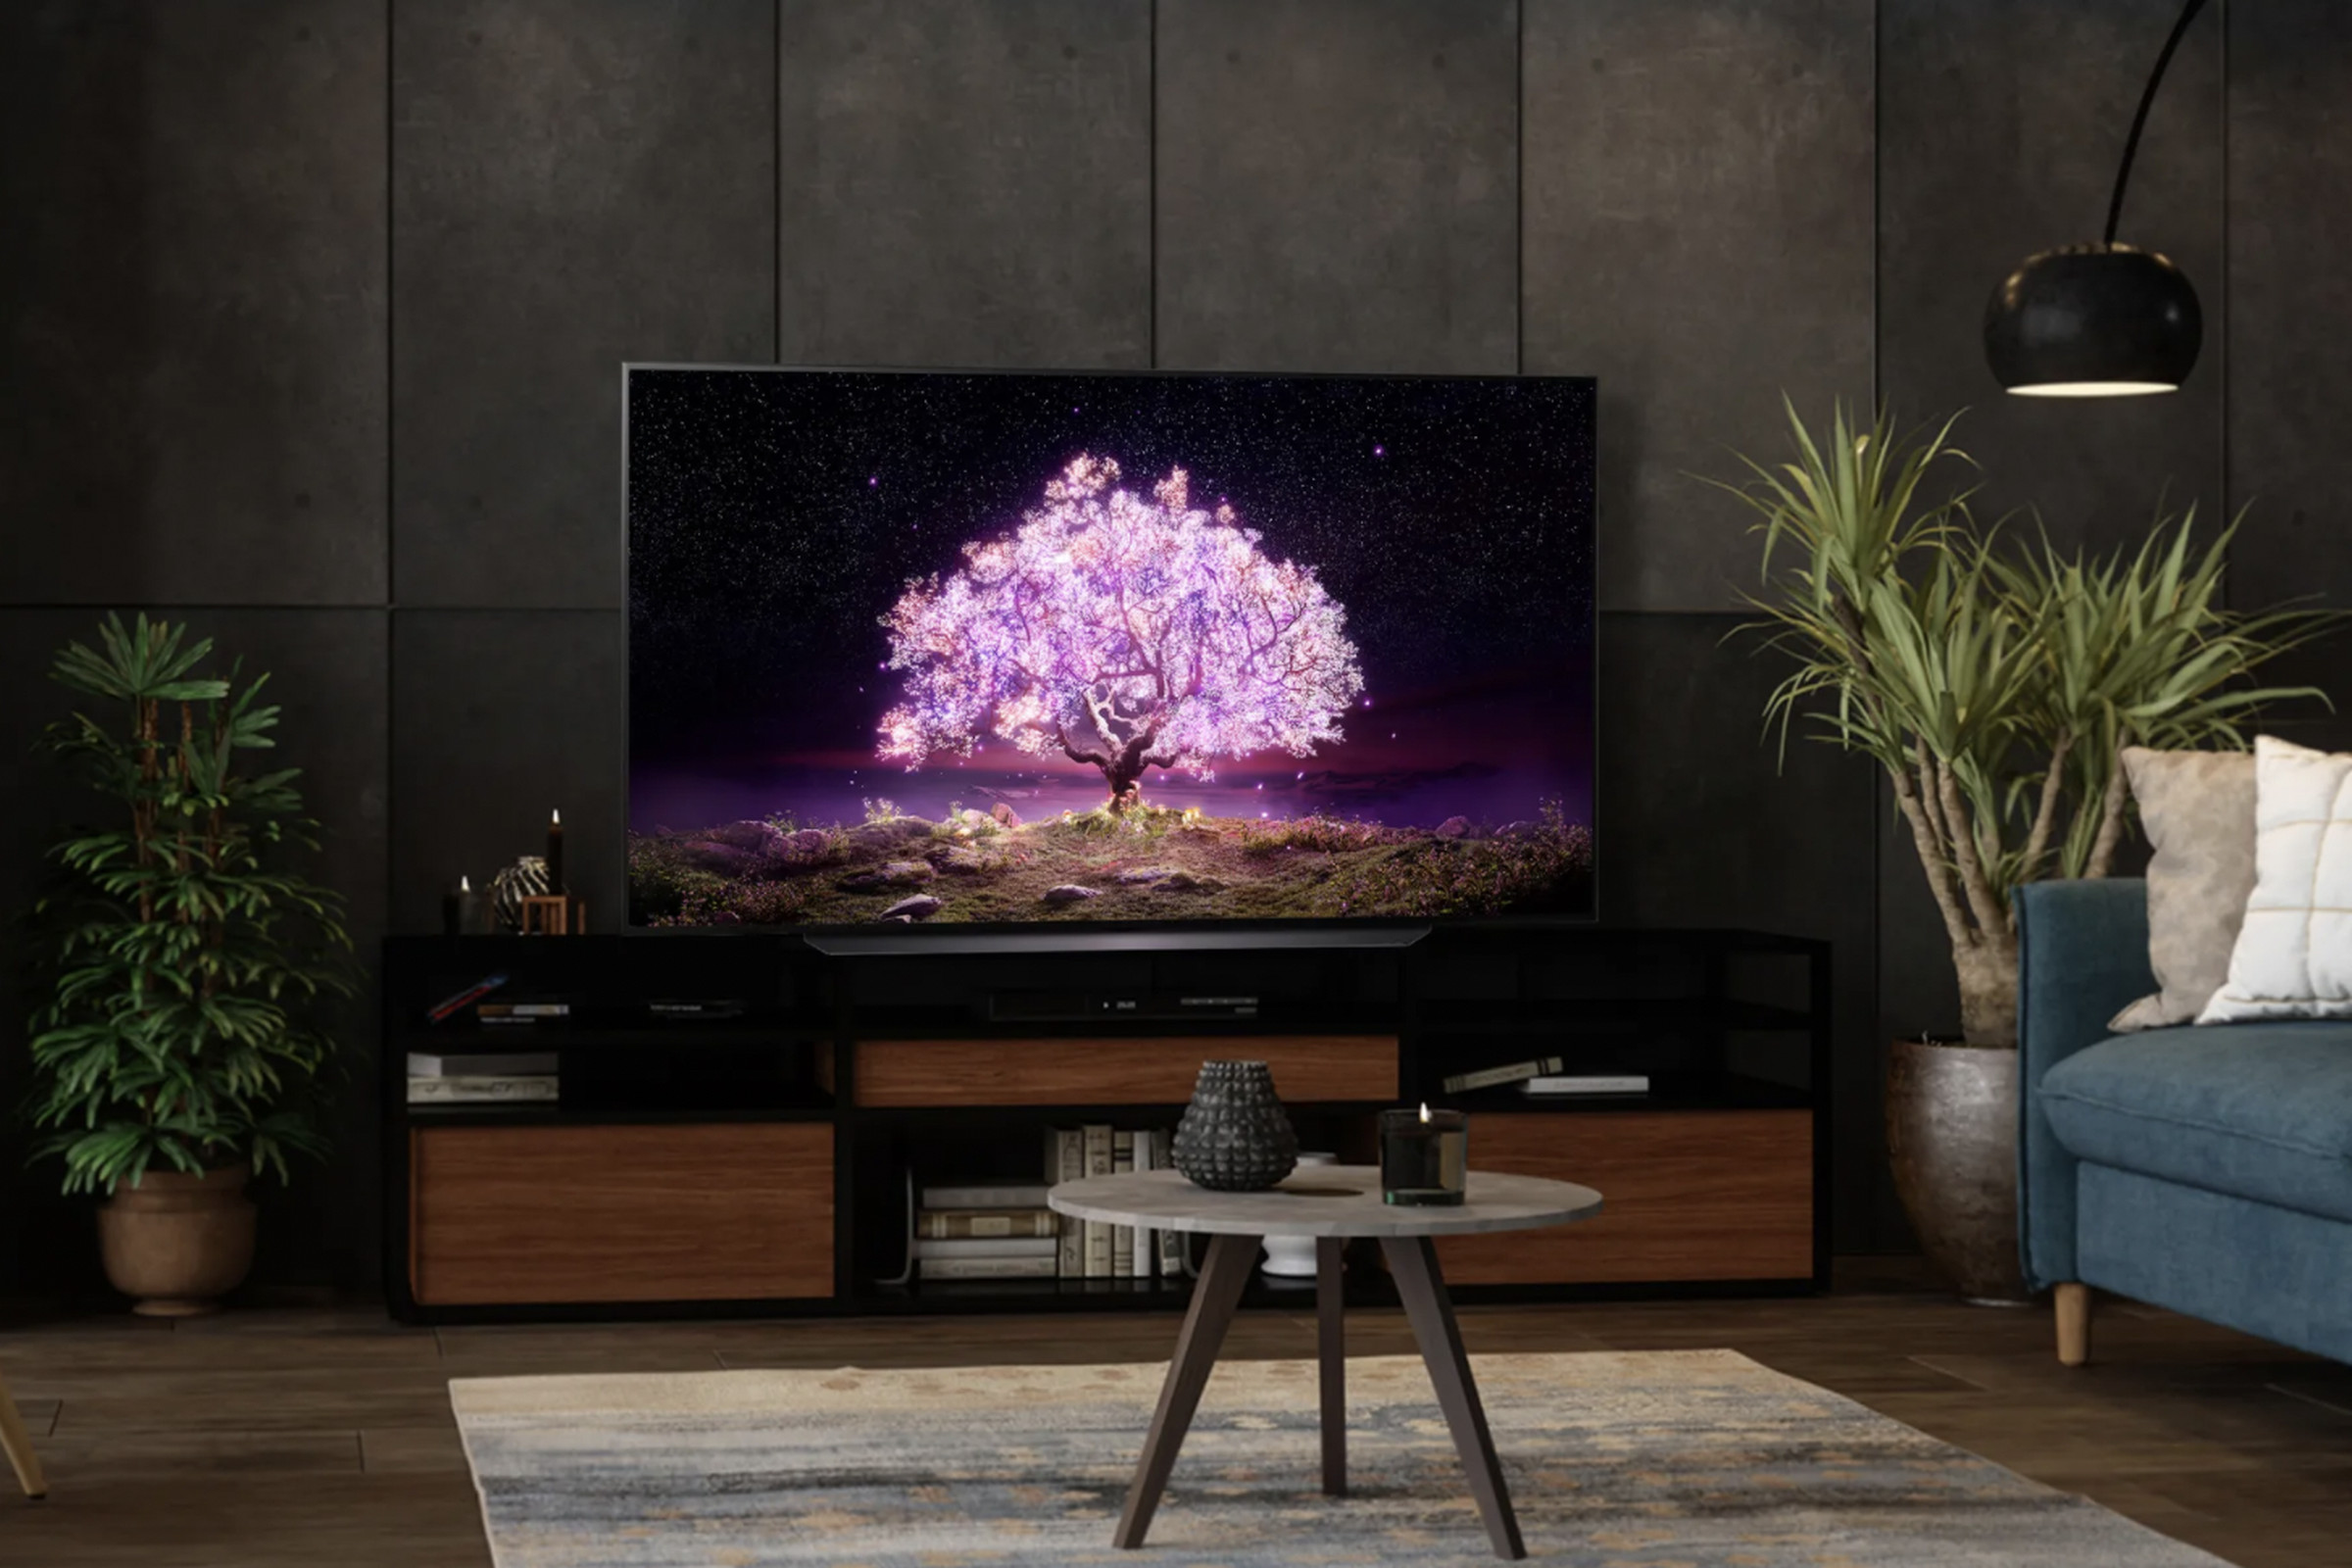 You can save up to $700 on LG’s brilliant C1 OLED today at multiple retailers.